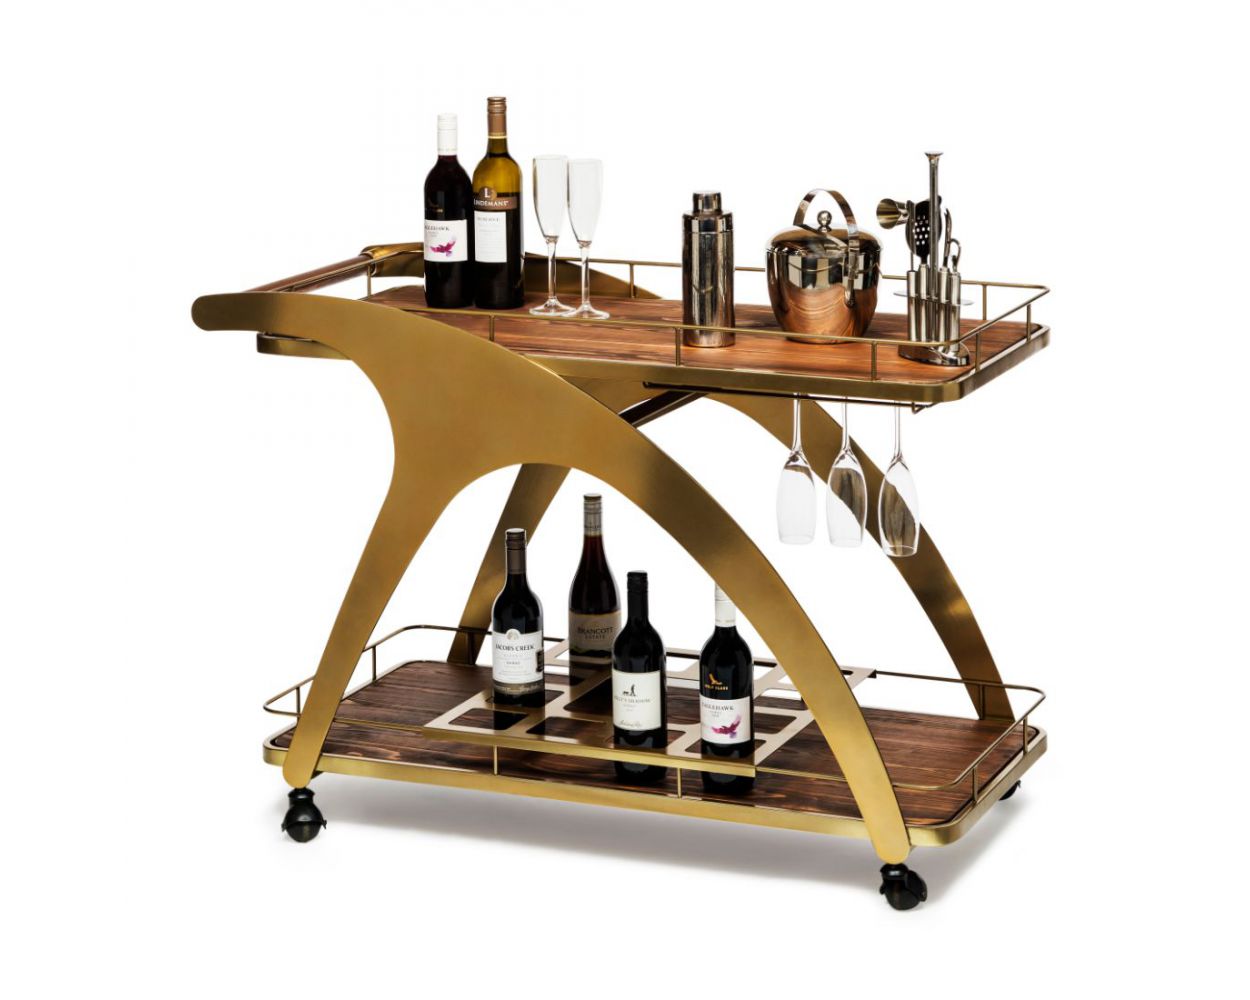 French Brass Drinks Trolley Bar Cart Contemporary Wine Storage With Wood Top